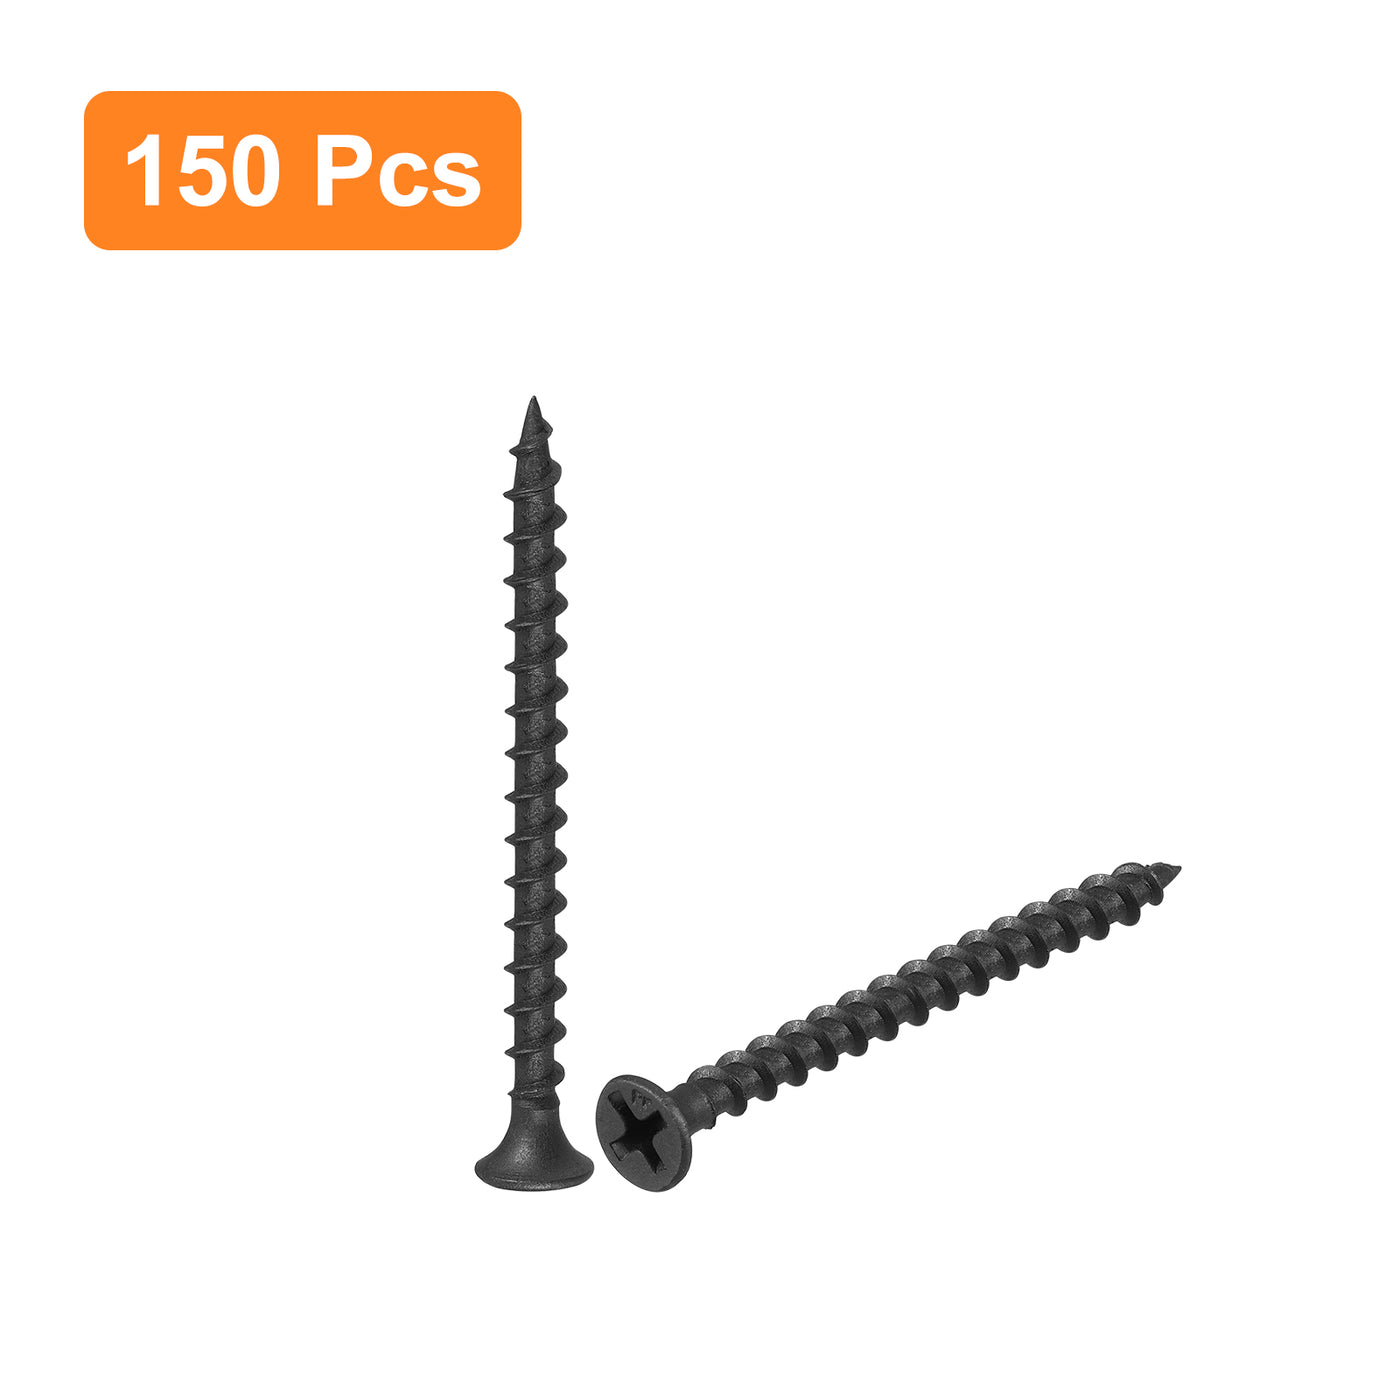 uxcell Uxcell M3.8x50mm 150pcs Phillips Drive Wood Screws, Carbon Steel Self Tapping Screws